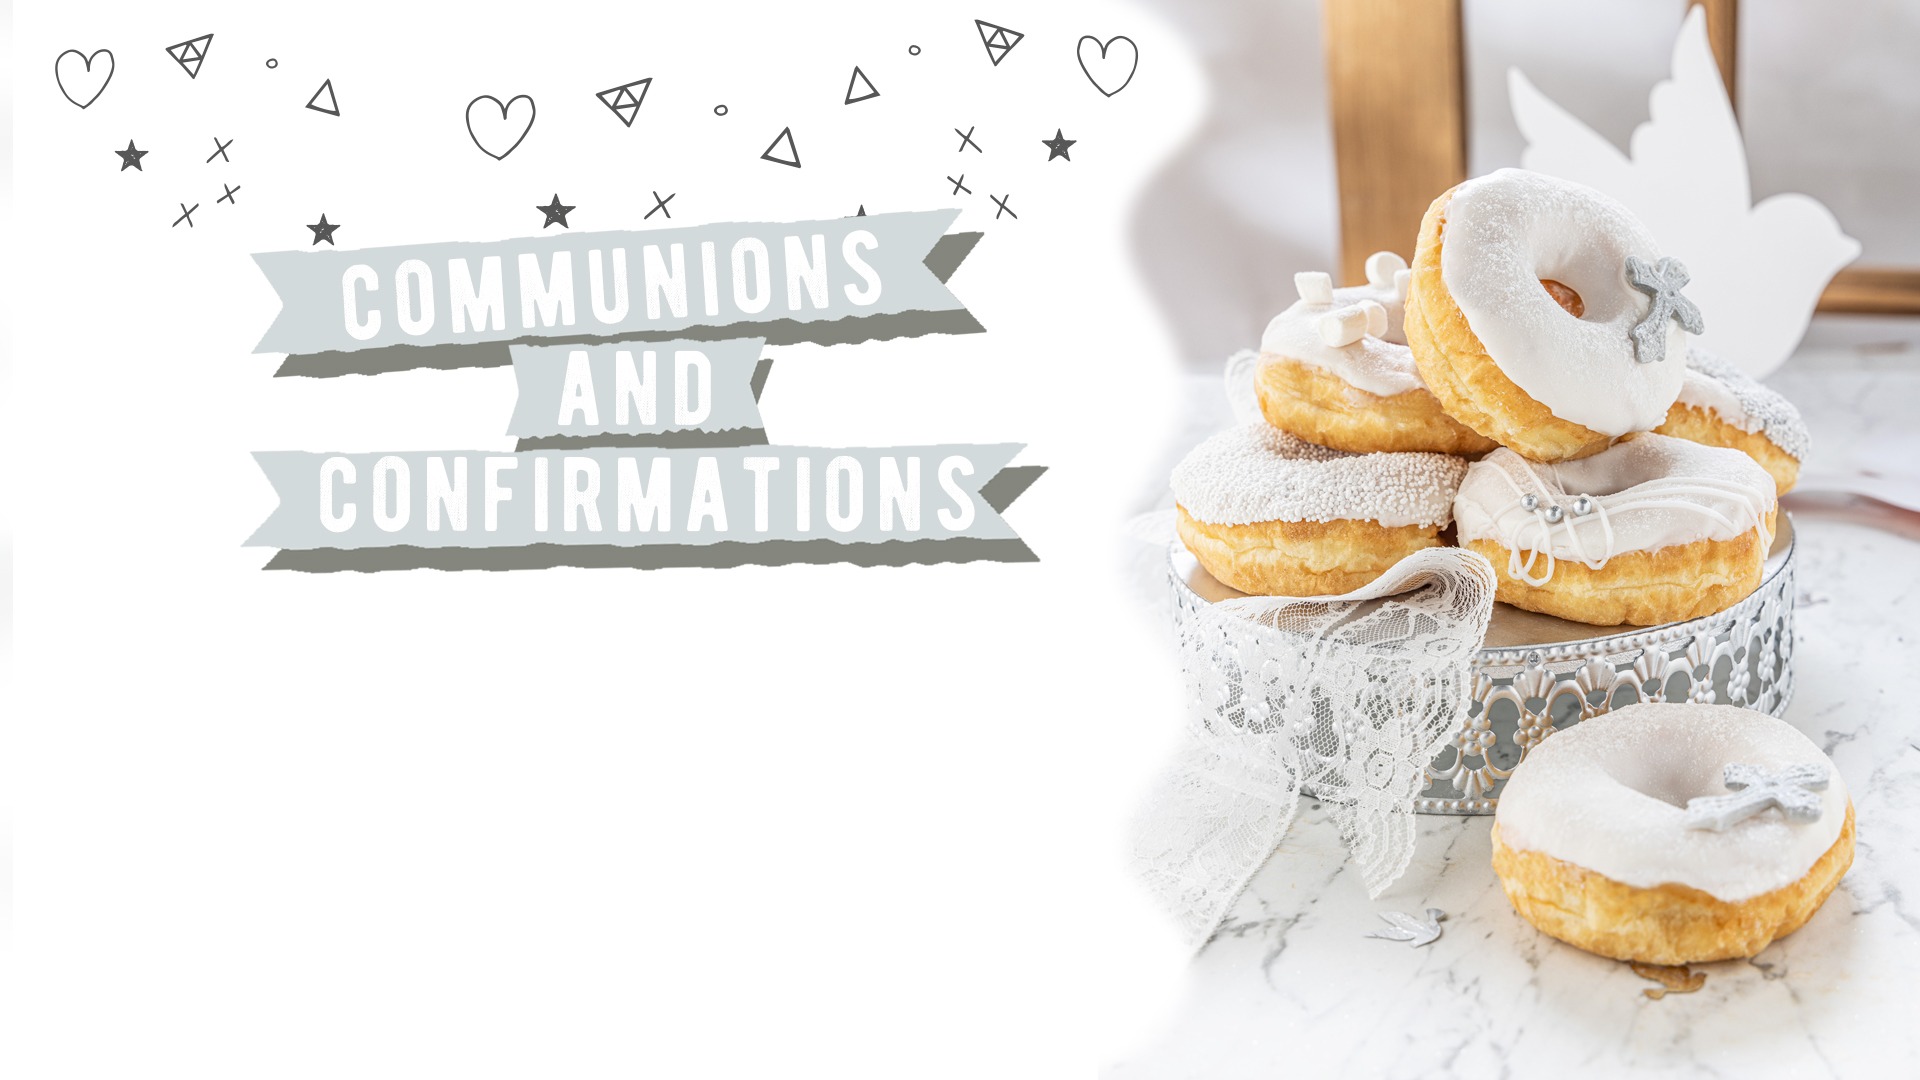 Communions confirmations themed donuts